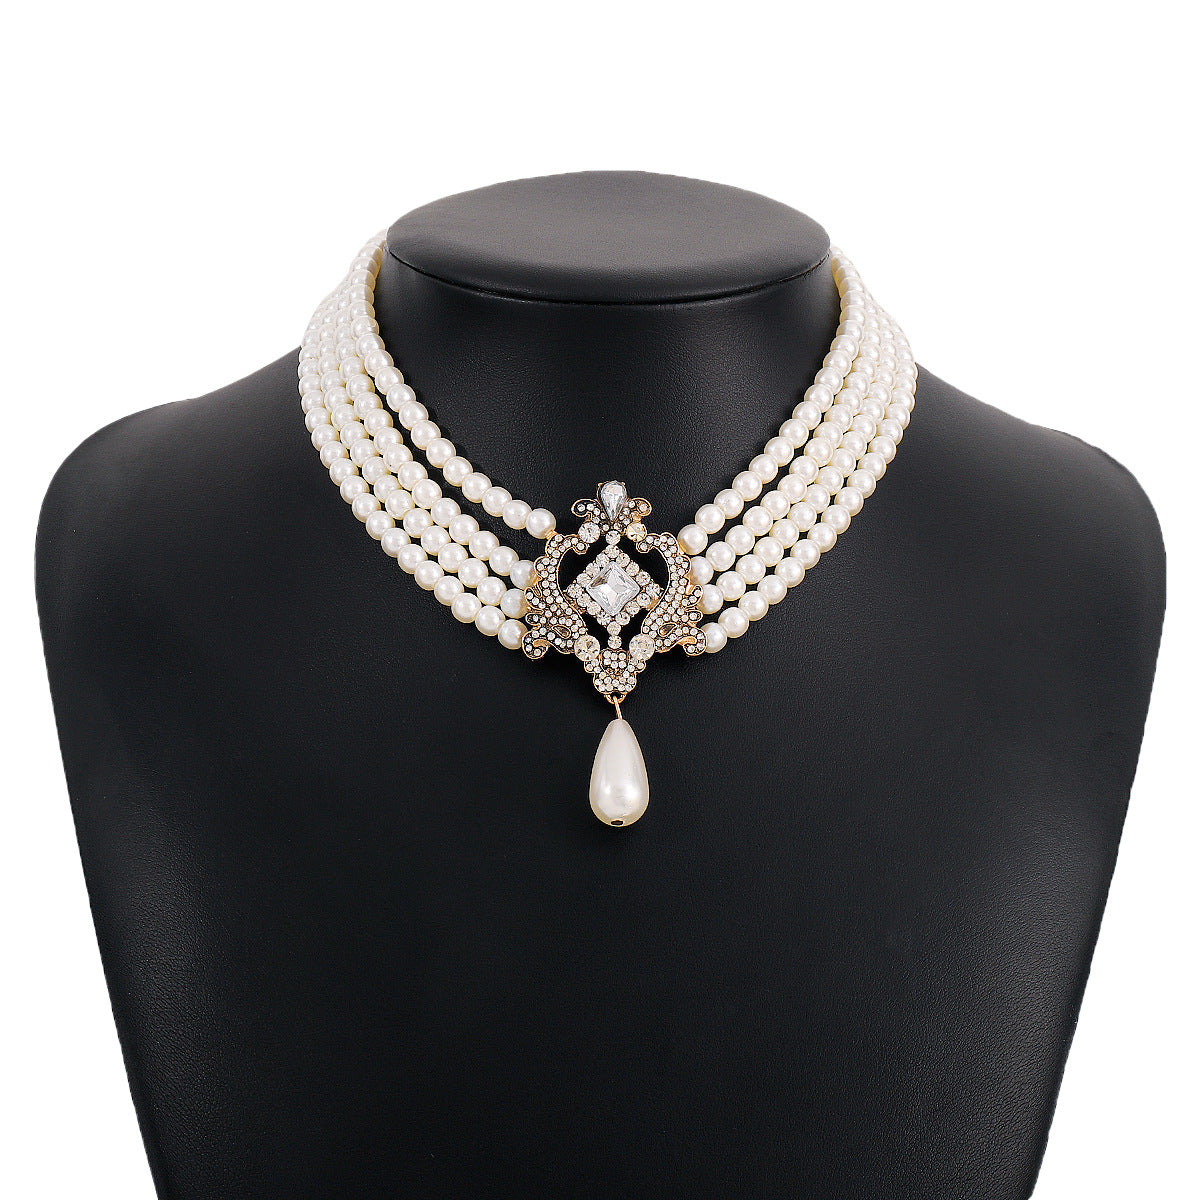 Baroque Style Multilayer Faux Pearl Necklace French Vintage Style Neck Accessory For Banquet